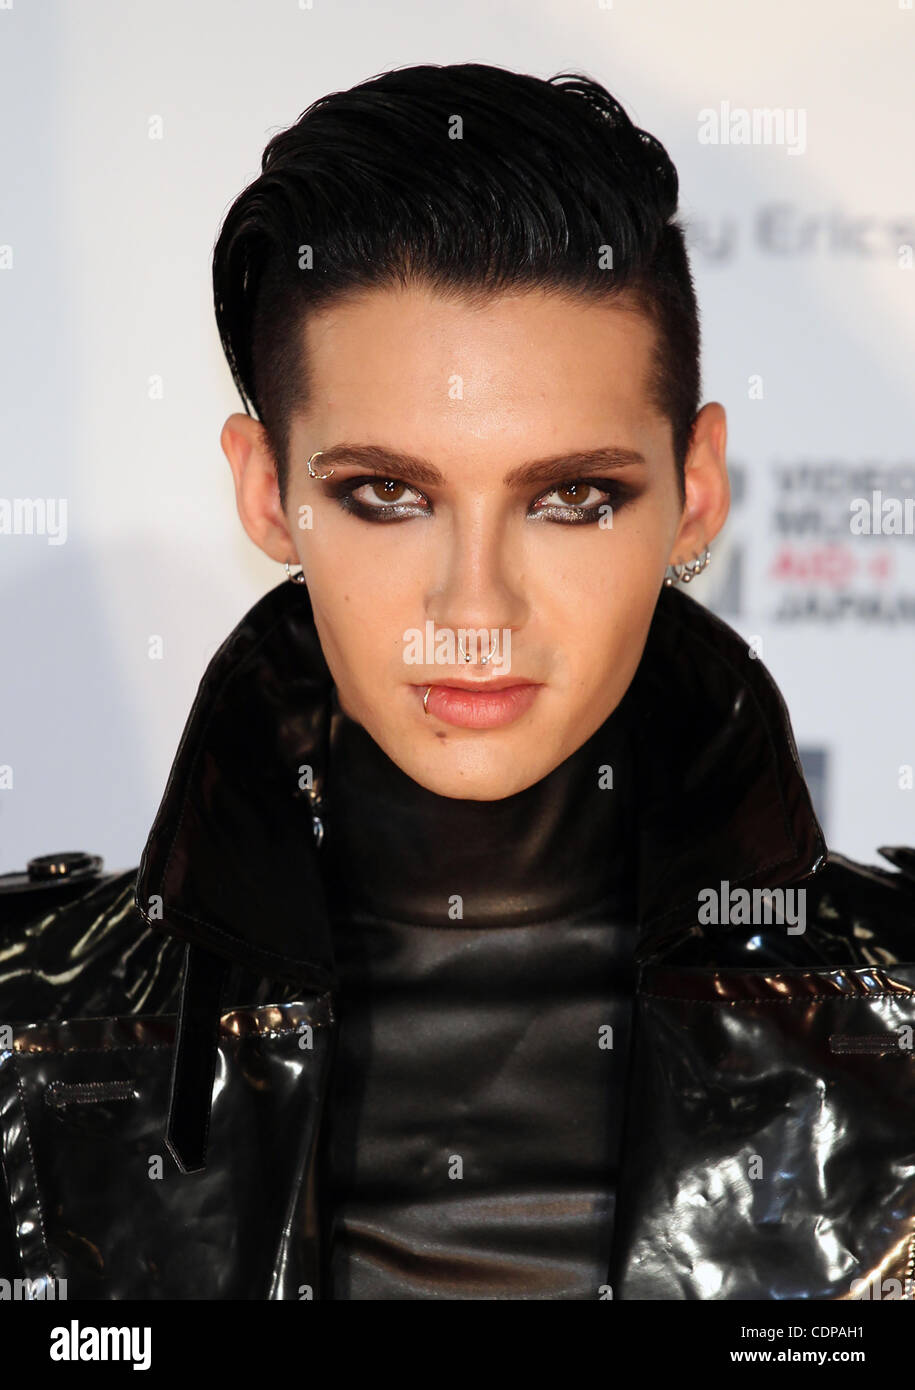 June 25, 2011 - Chiba, Japan - Bill Kaulitz of Tokio Hotel poses on the red  carpet during the MTV Video Music Aid Japan 2011 at Makuhari Messe Event  Hall in Chiba,